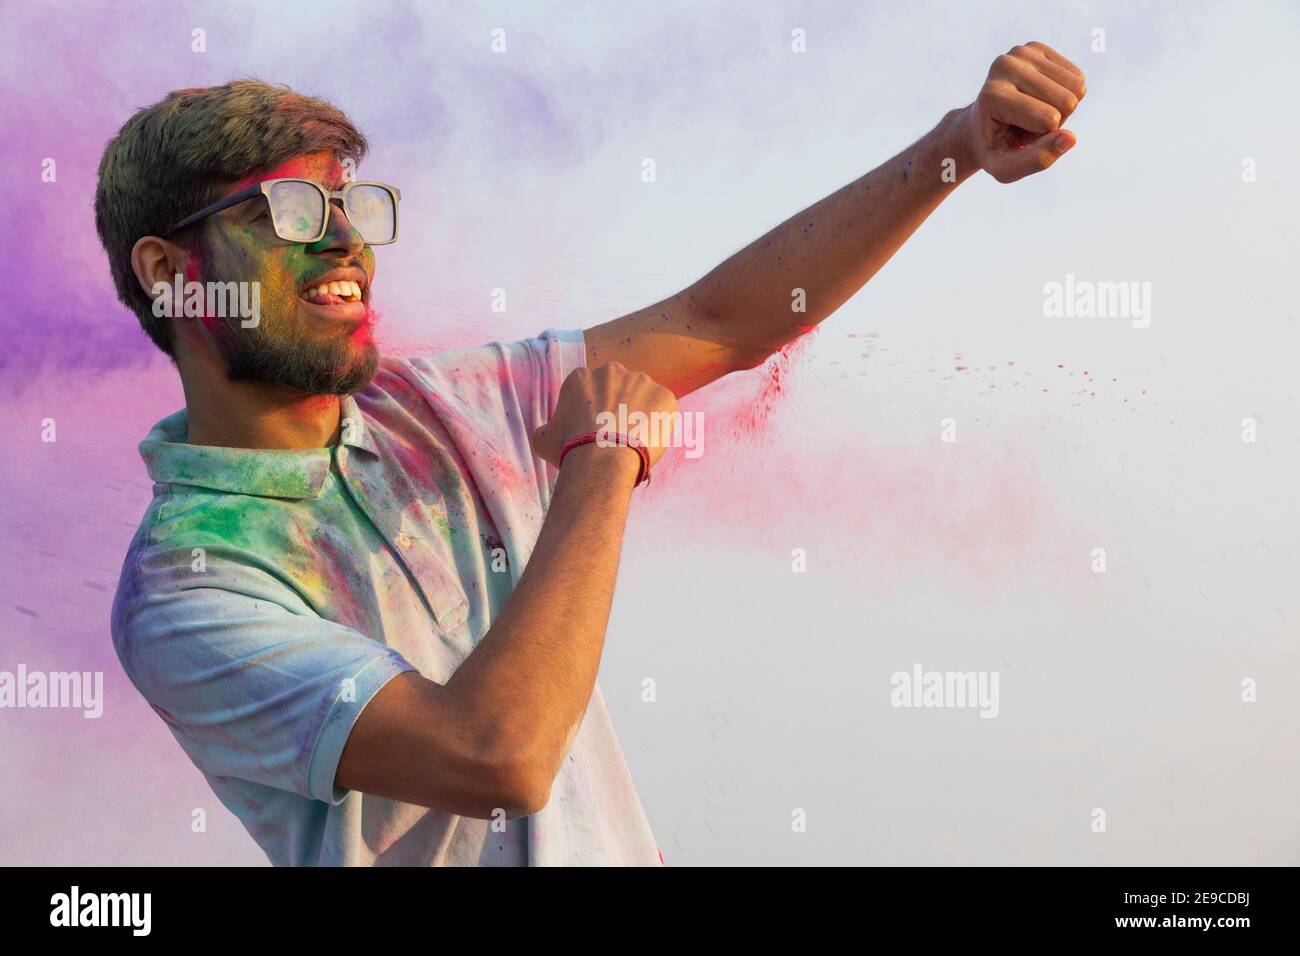 A YOUNG MAN HAPPILY DANCING DURING HOLI CELEBRATIONS Stock Photo